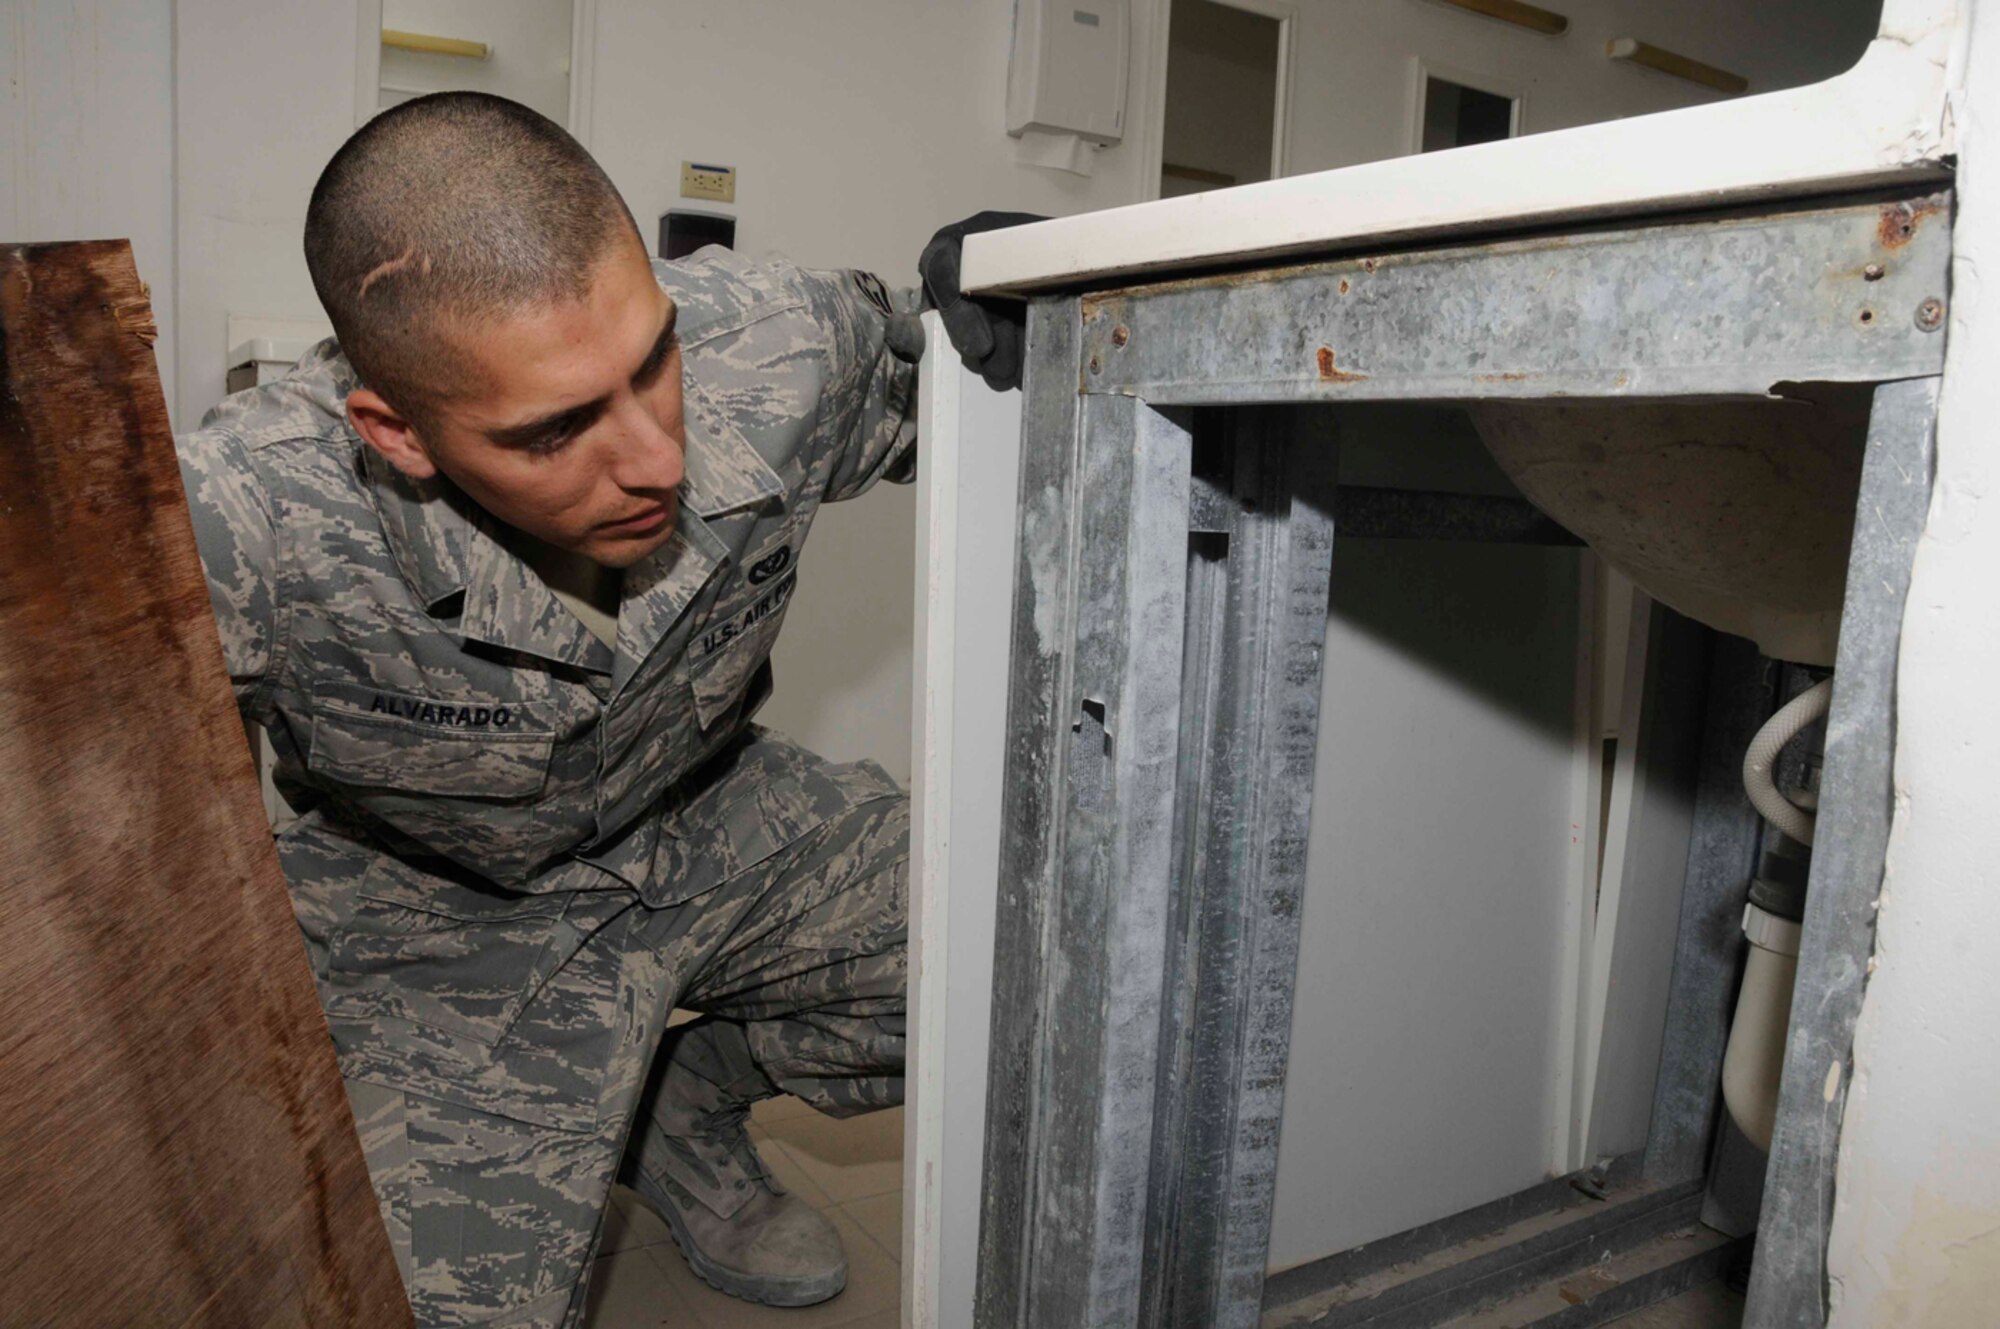 Staff Sgt. Cesar Alvarado, 379th Expeditionary Civil Engineer Squadron, removes plywood to check for water damage behind the cadillac sinks July 30 in Southwest Asia. Cadillacs are bathroom facilities for deployed military members and its Sergeant Alvarado’s job to perform daily maintenance on it. Sergeant Alvarado is a structural journeyman deployed from Eglin Air Force Base, Fla. (U.S. Photo/Staff Sgt. Darnell T. Cannady)